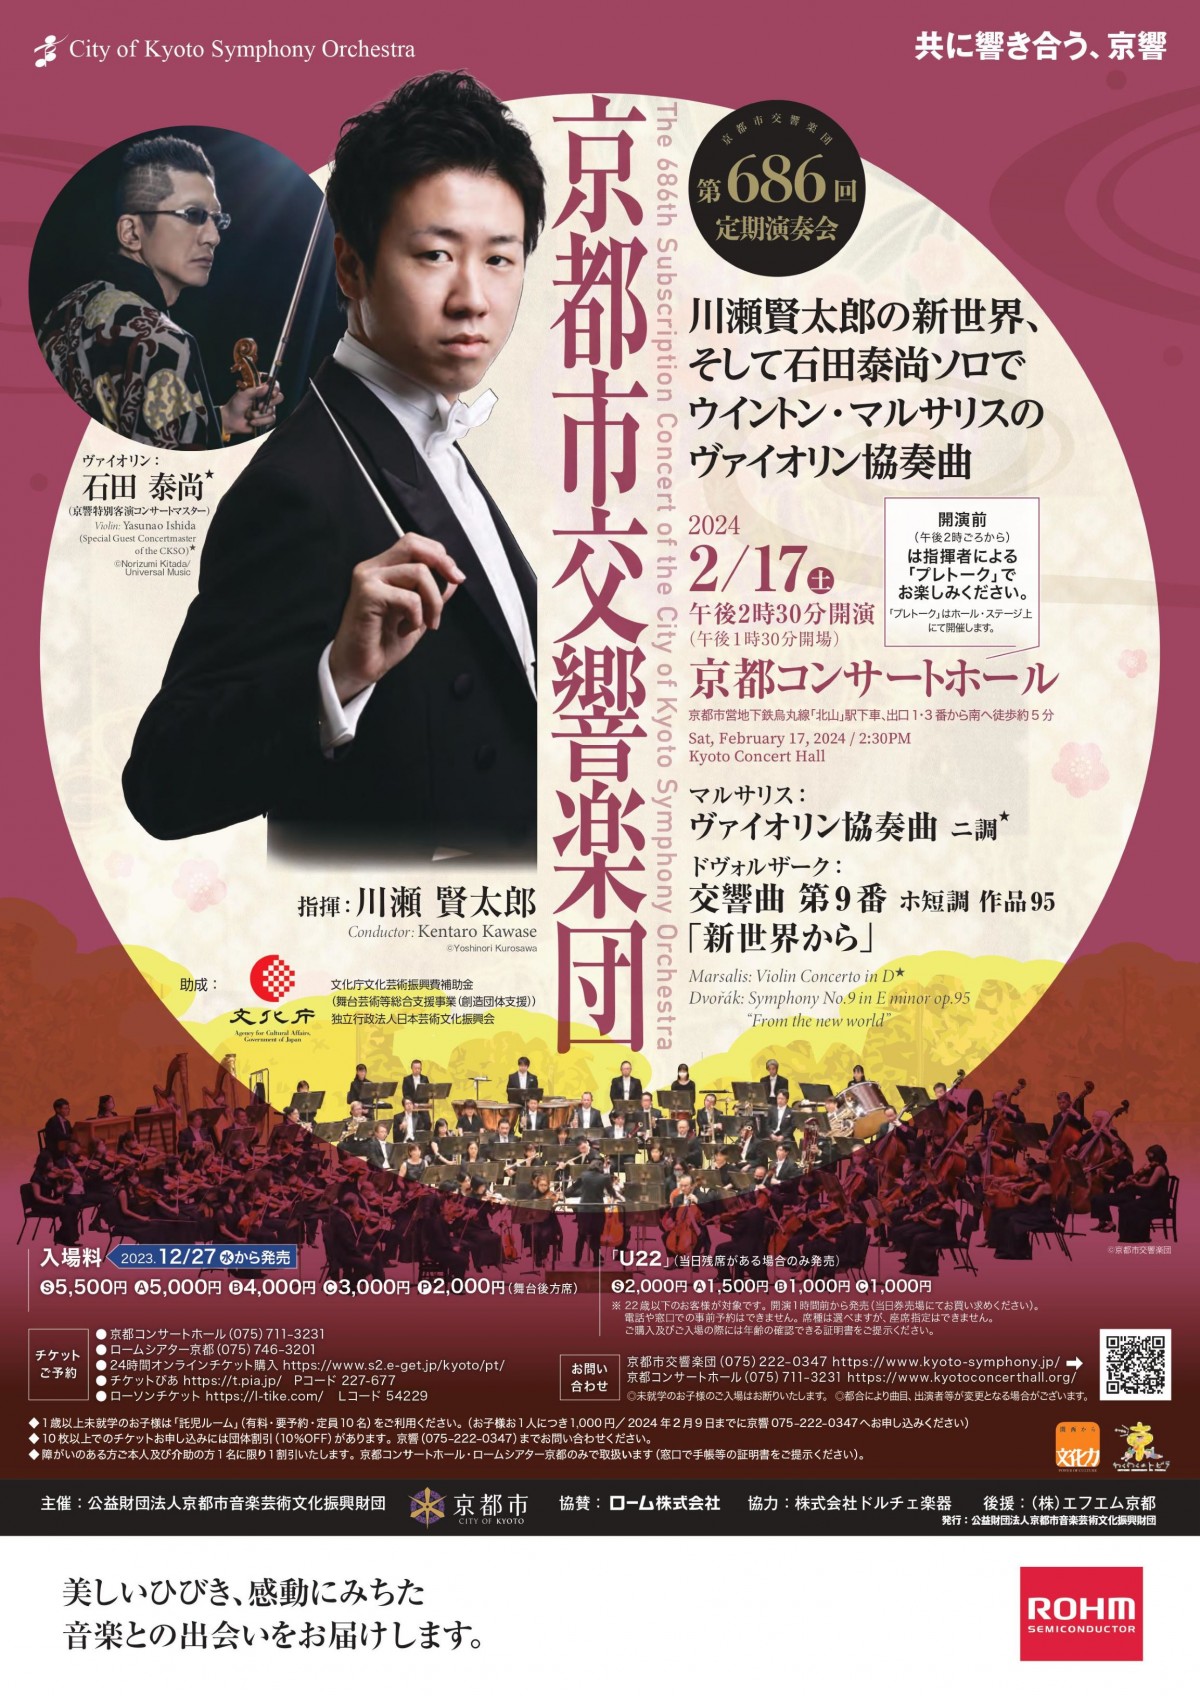 ＜SOLD OUT !＞
The 686th Subscription Concert